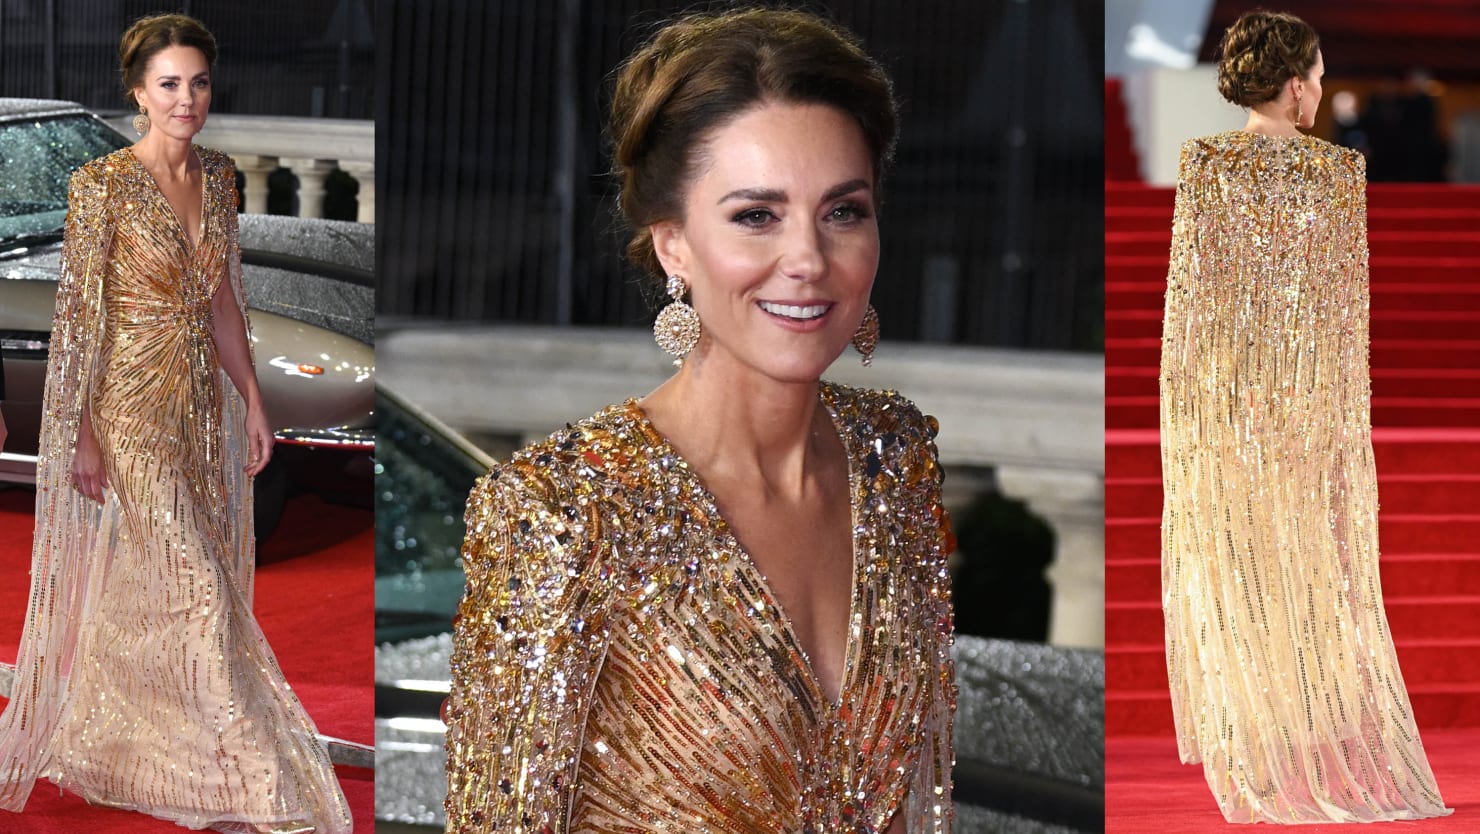 James Bond film premiere: Kate Middleton and other stars line the red carpet